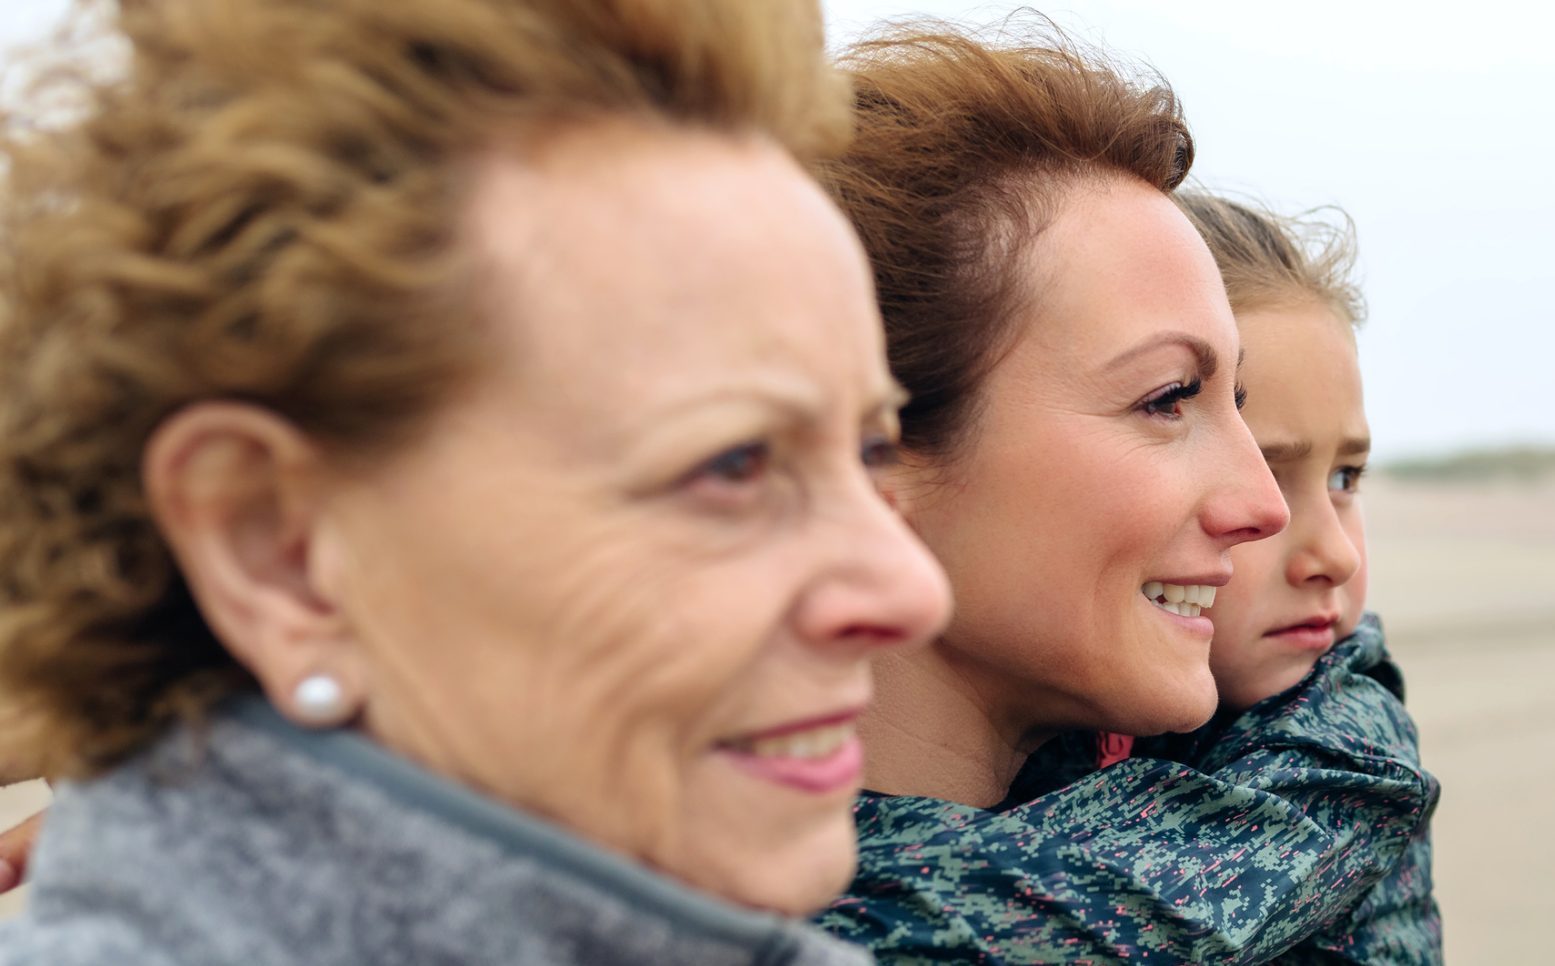 3 women at the seaside